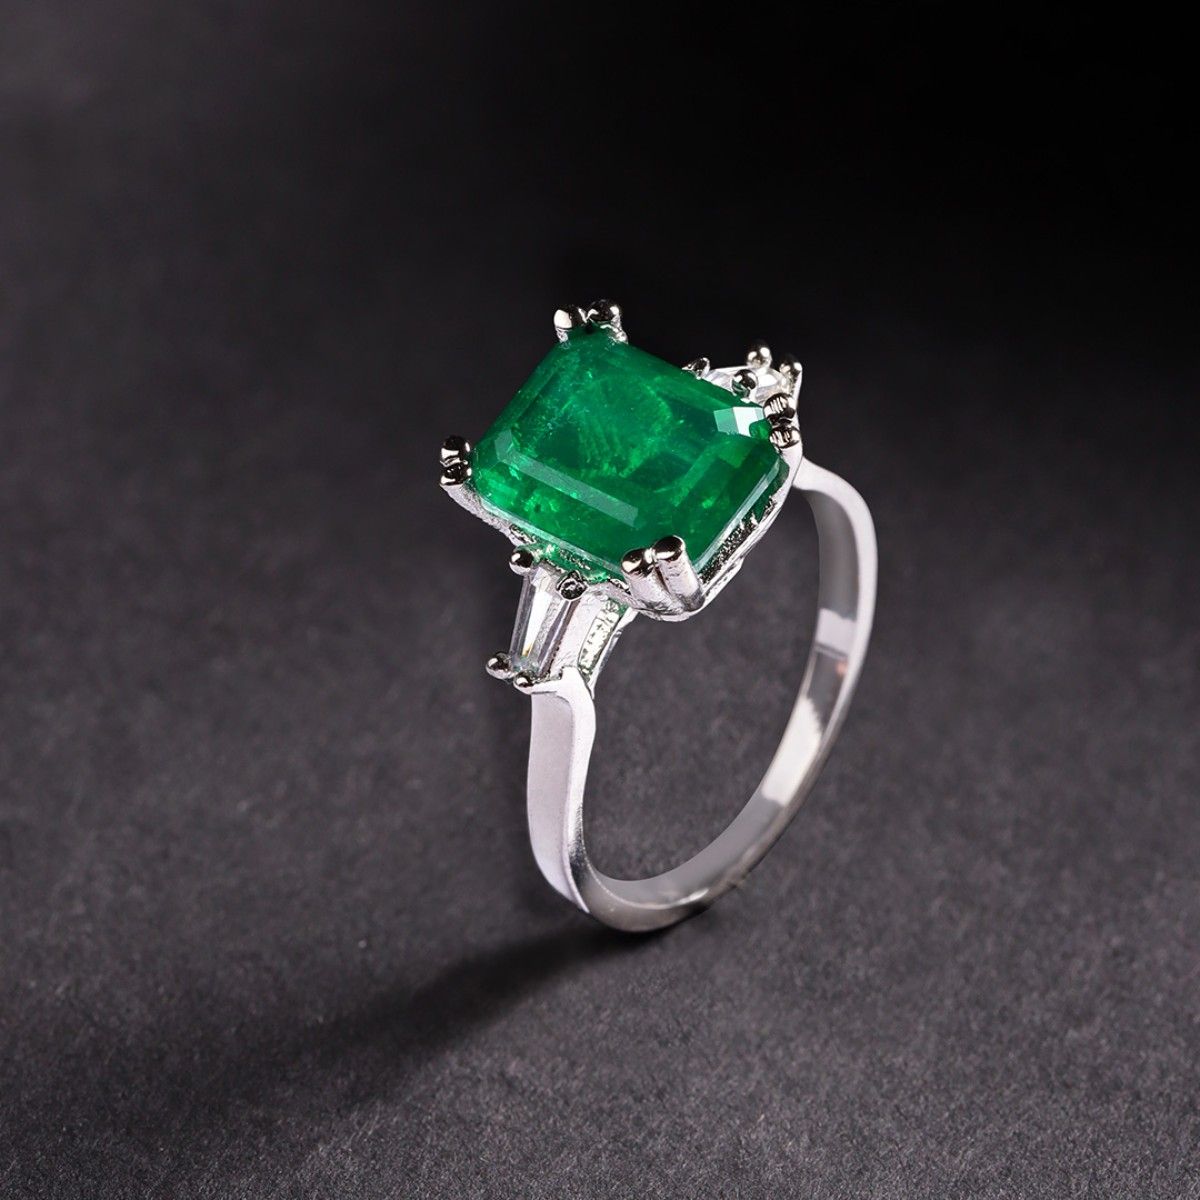 Buy Emerald Ring, Green Stone Ring, Square Emerald Ring, Modern Design Emerald  Ring, Vintage Emerald Ring, Square Cut Emerald Ring, May Stone Online in  India - Etsy